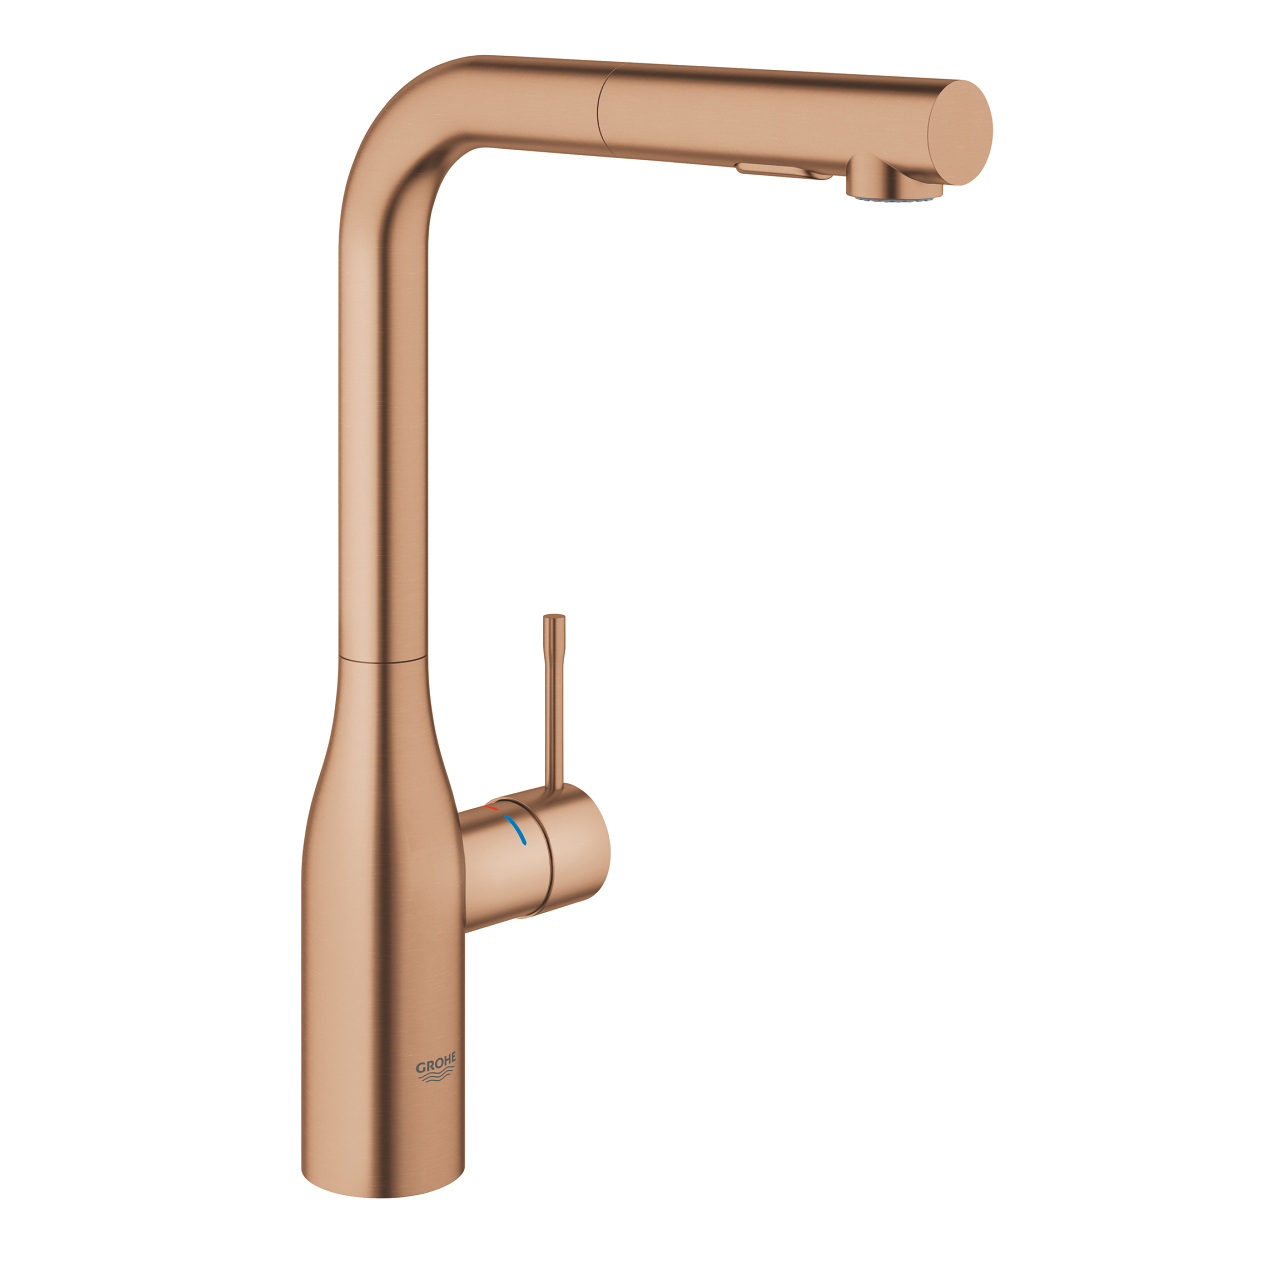 Baterie bucatarie Grohe Essence cu dus extractibil dual spray pipa L brushed warm sunset Baterie